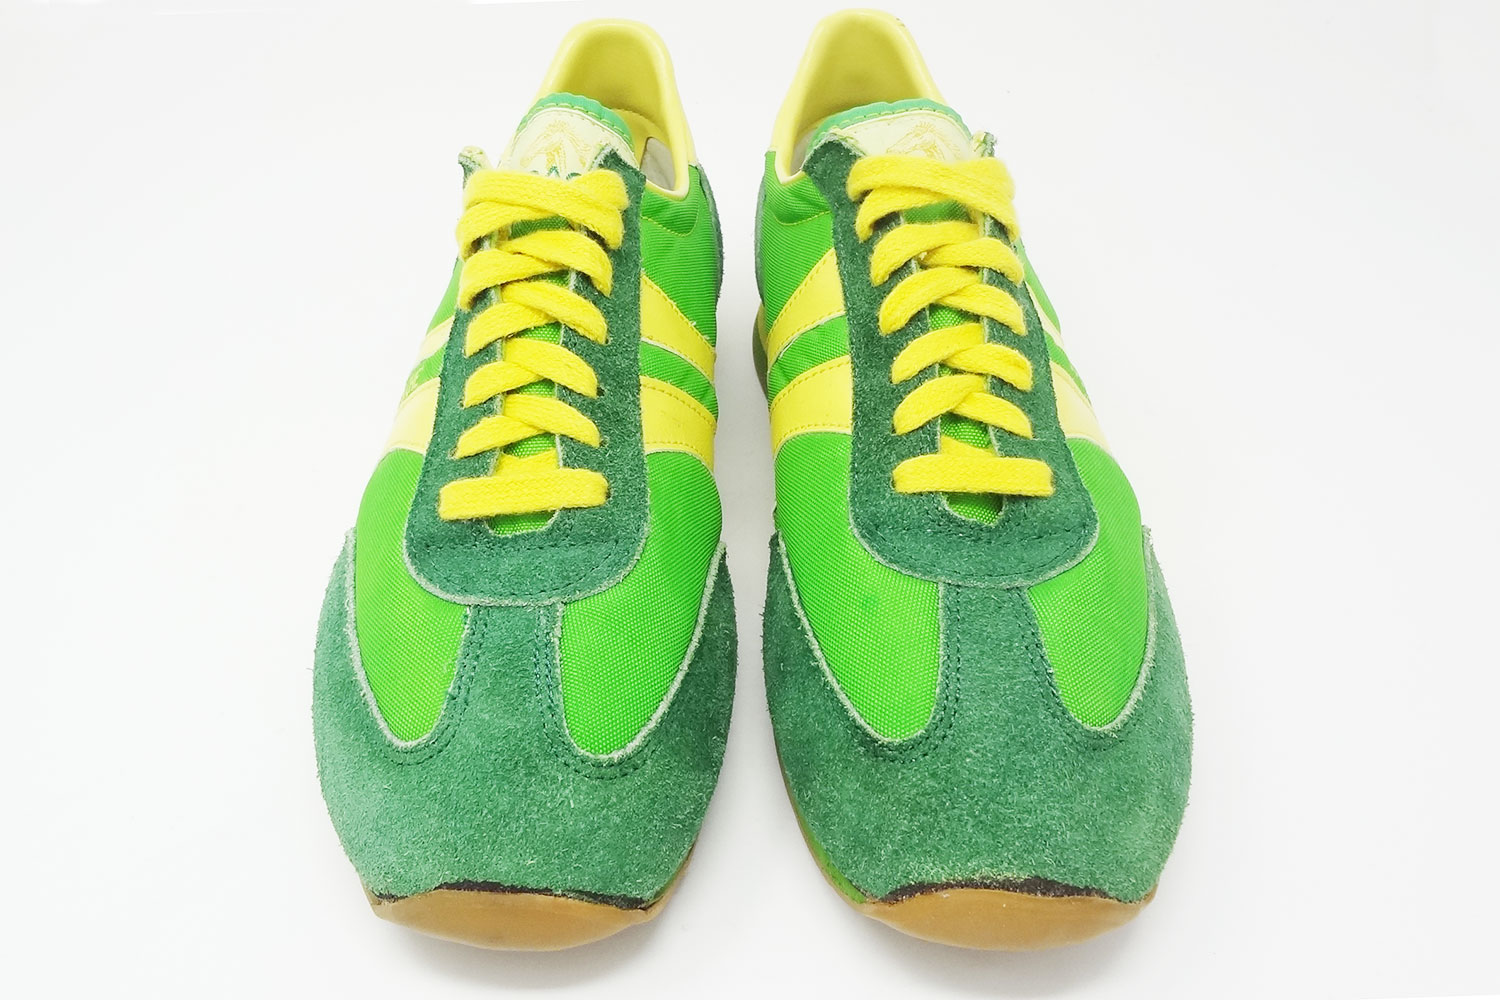 Vintage Jordache green and yellow sneakers front low profile @ The Deffest